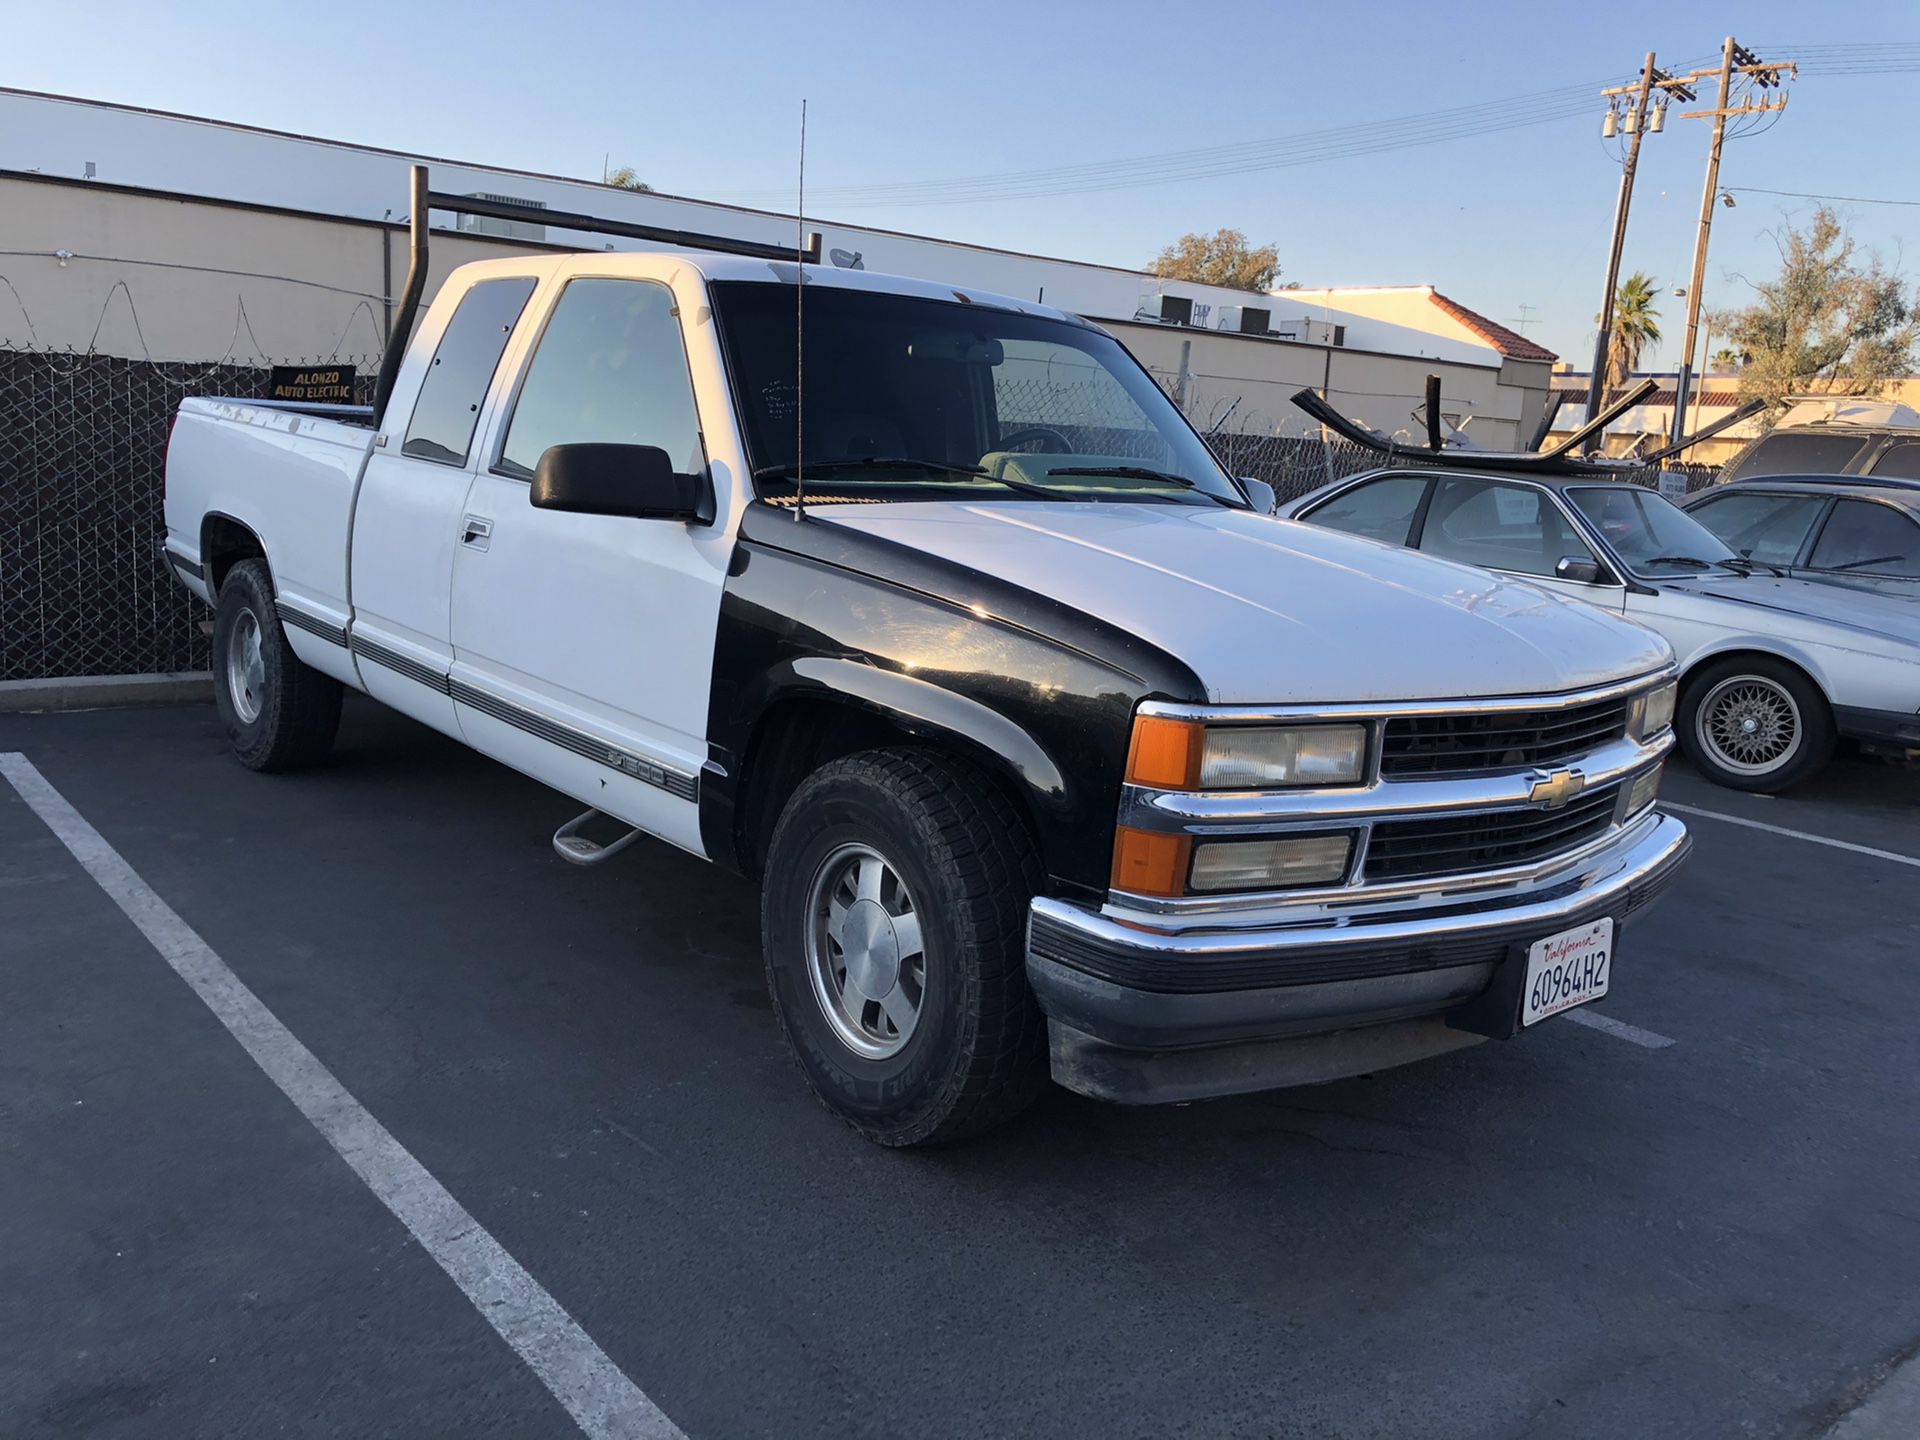 1994 Chevy 1500 pick up